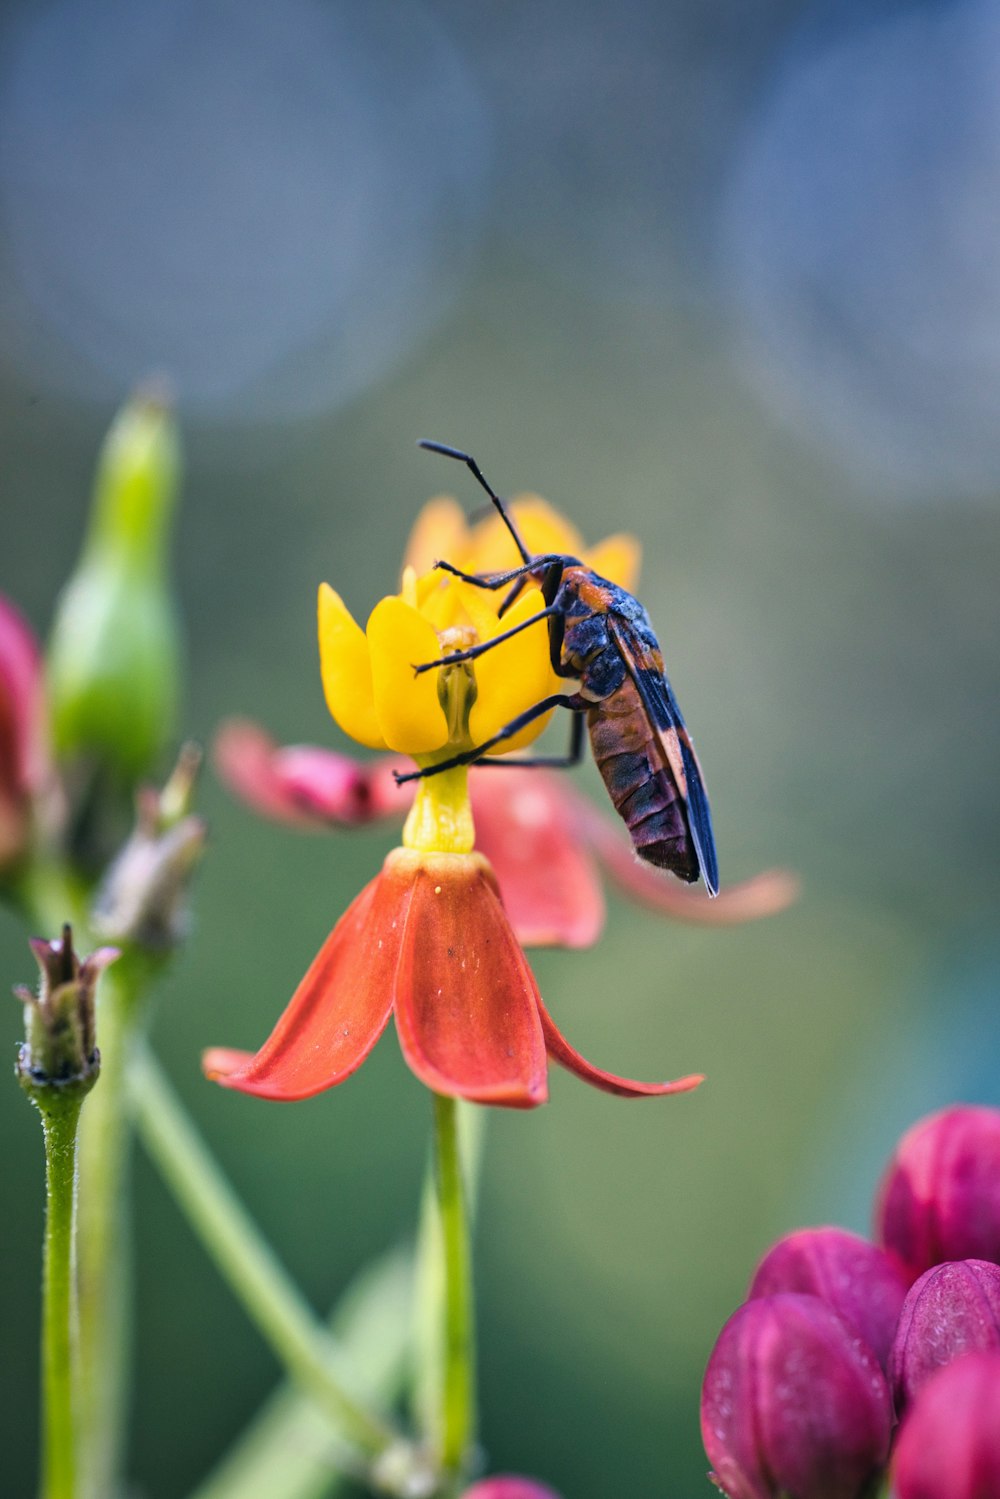 a bug on a flower with a blurry background